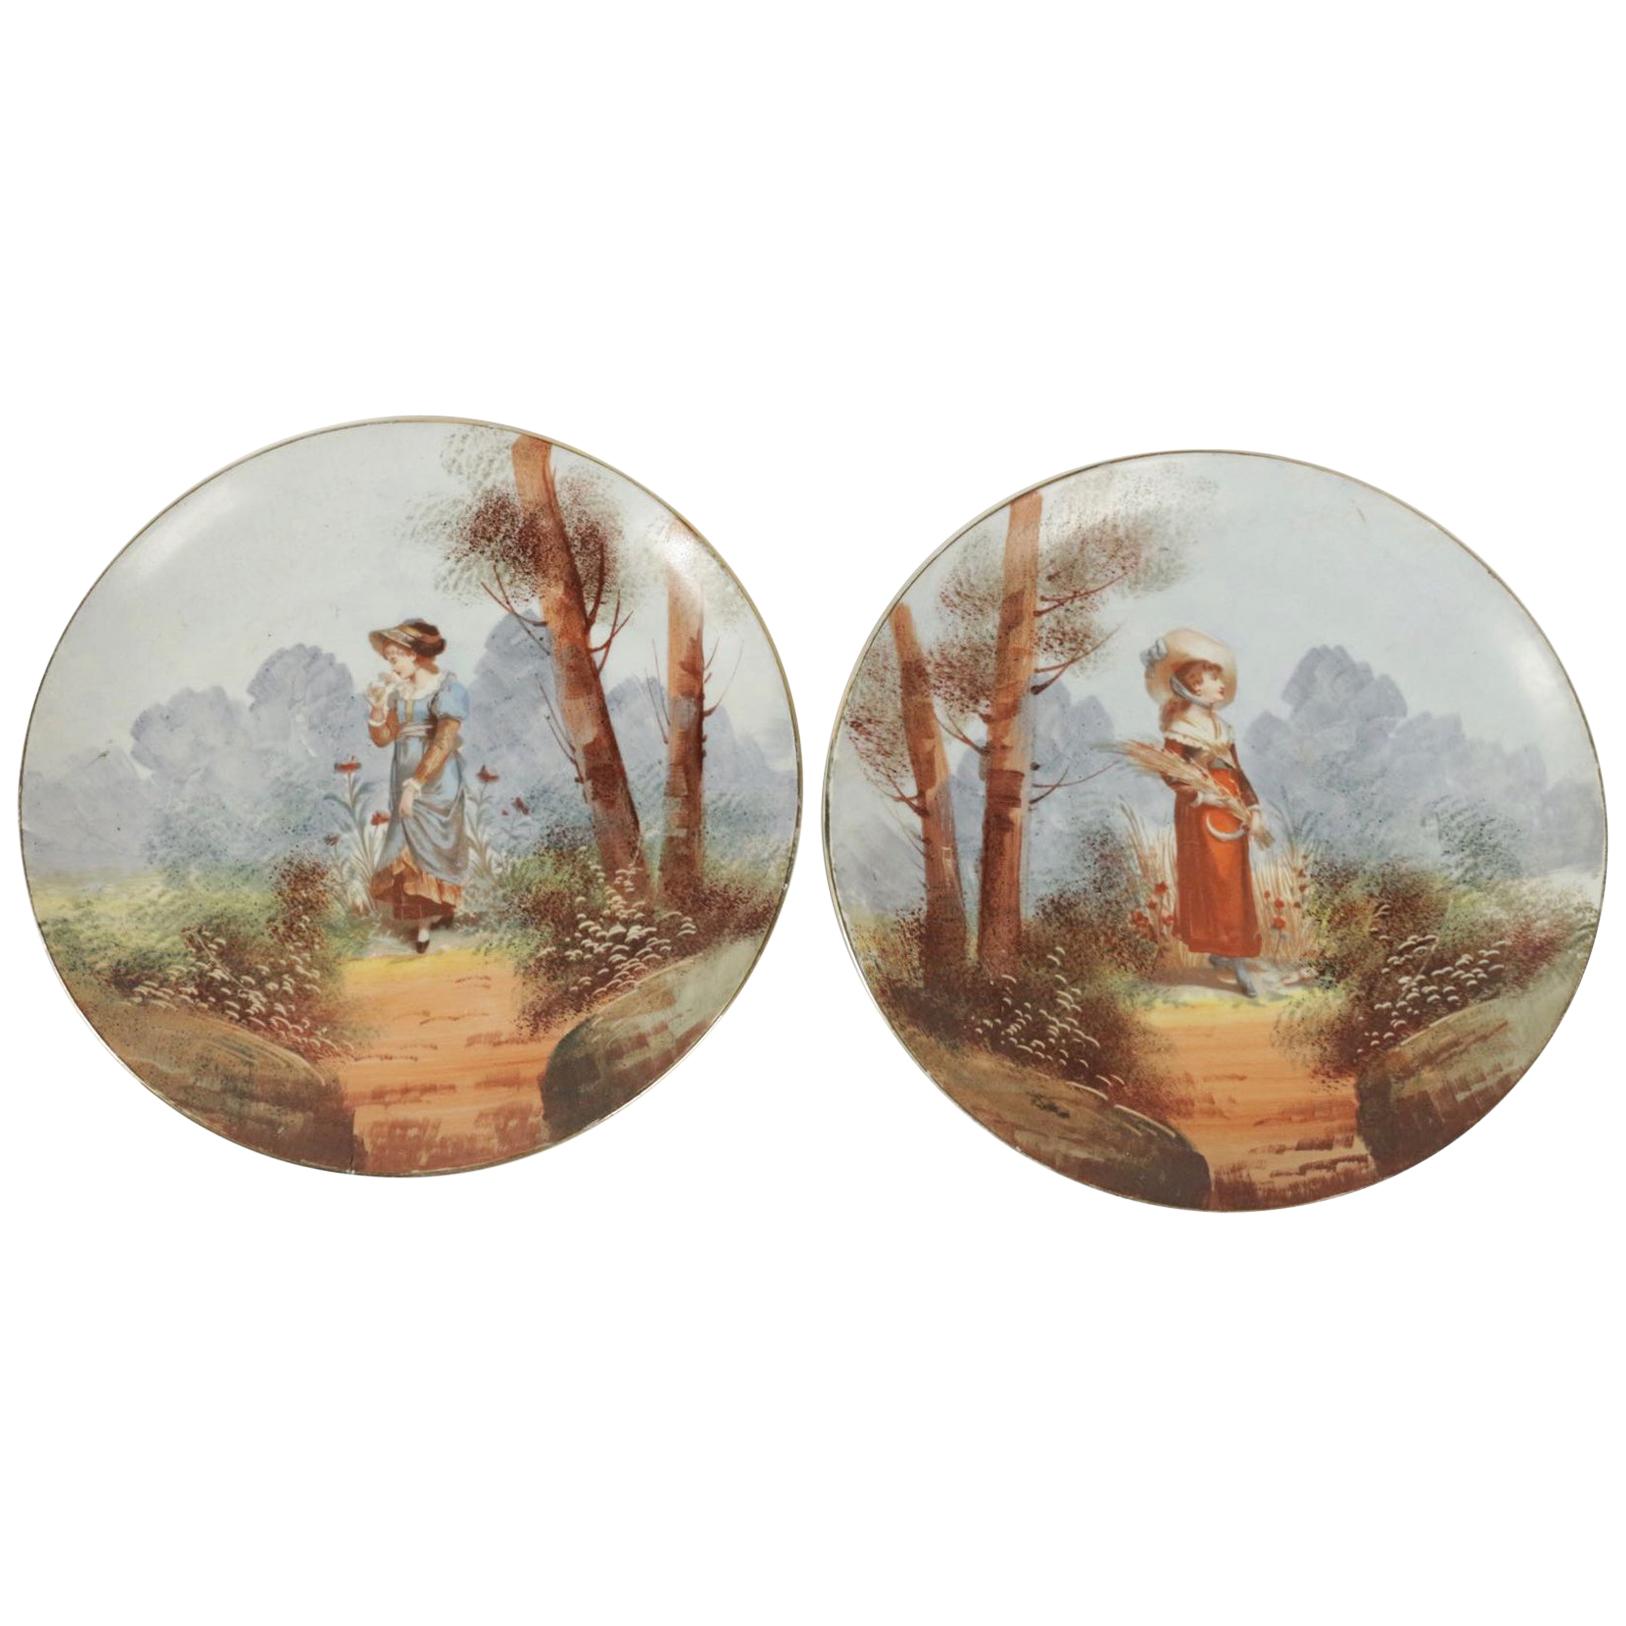 Pair of French Porcelain Hand Painted Plates from the 19th Century